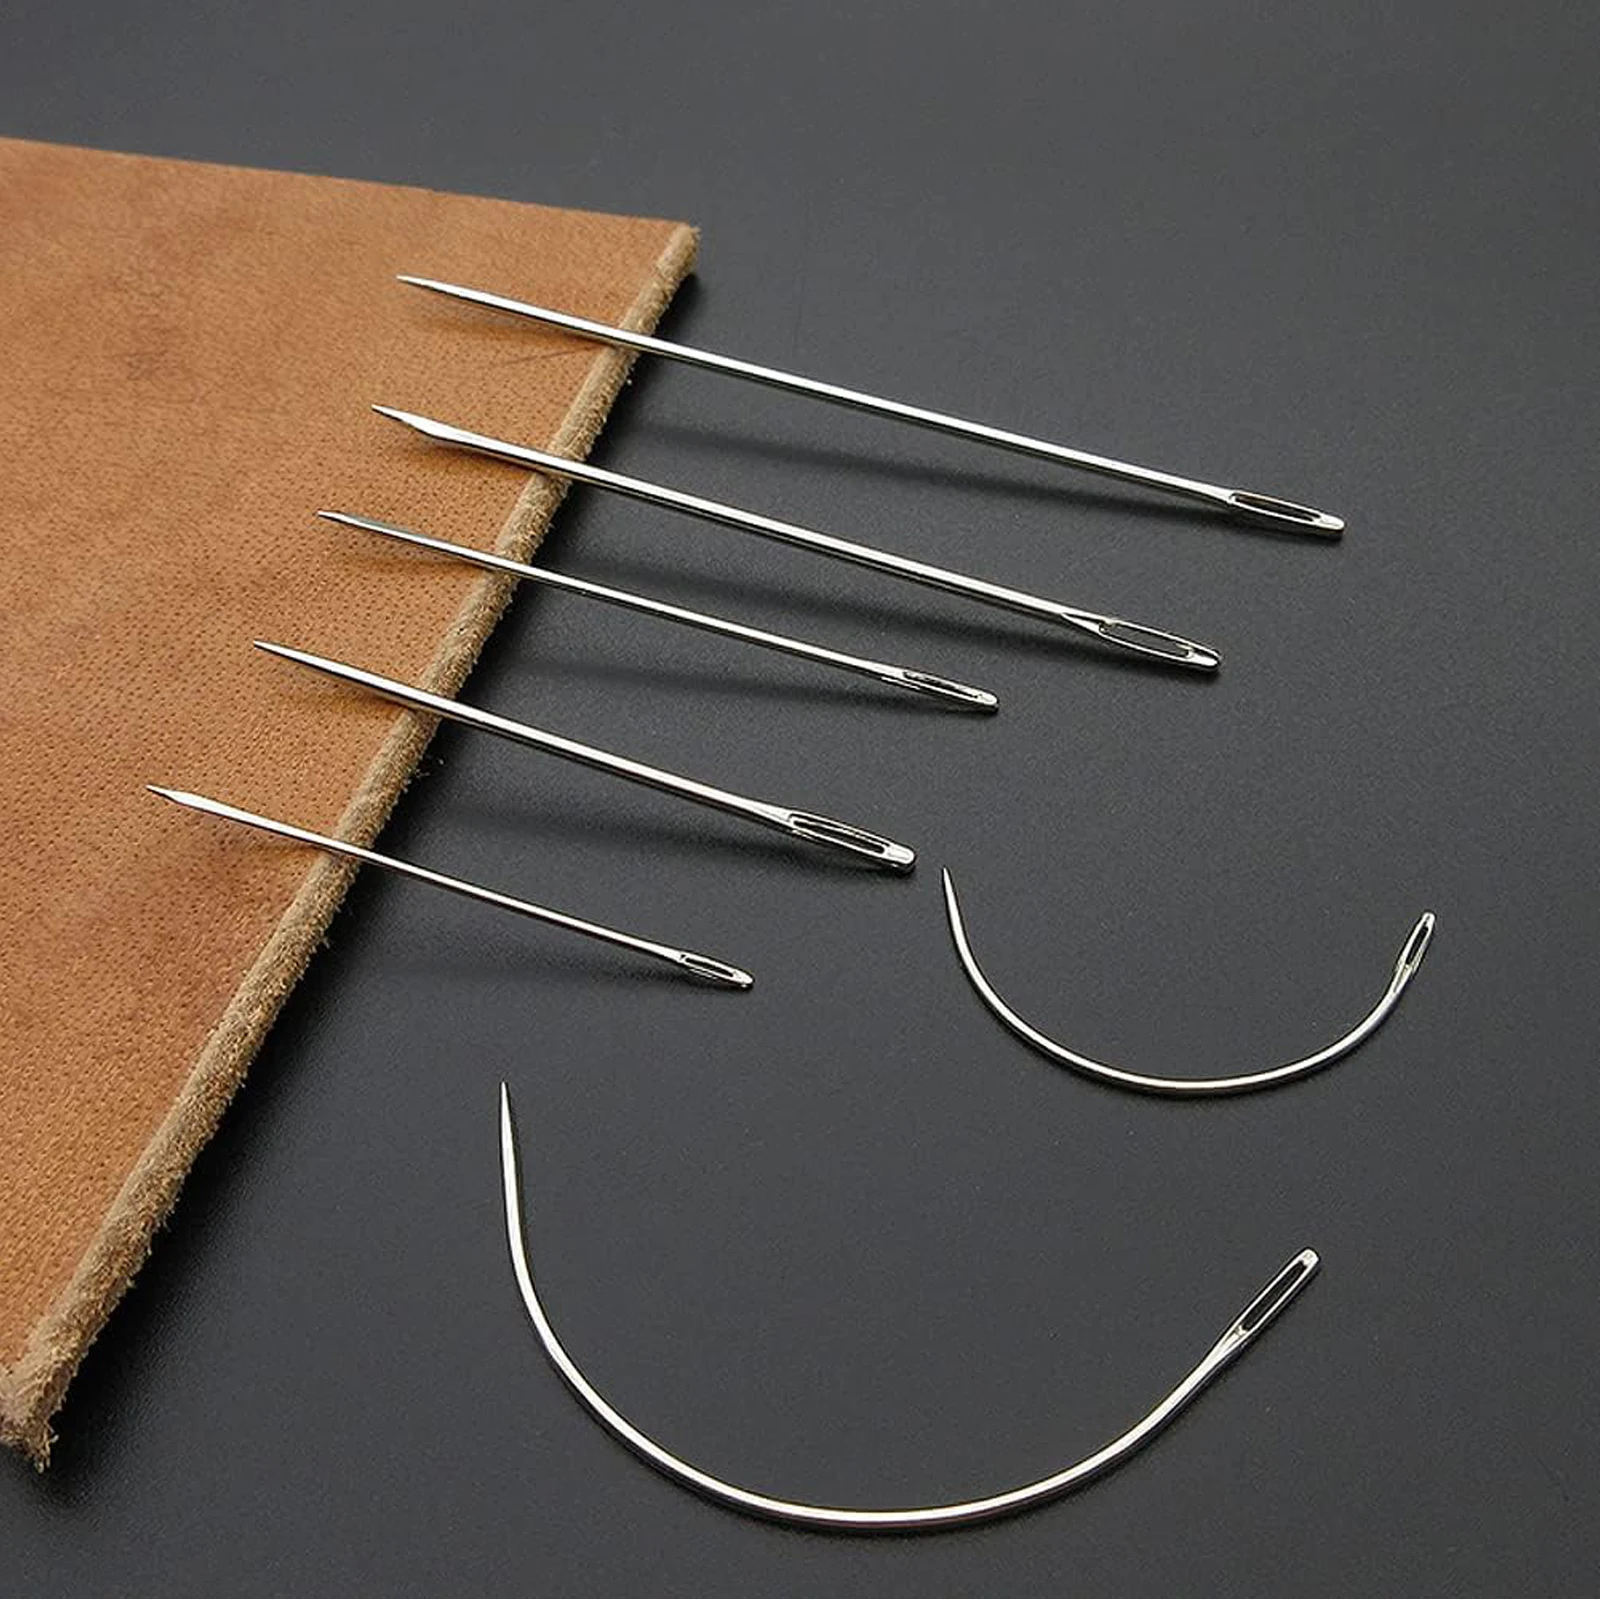 55Yards Waxed Thread with 7 Pcs Leather Hand Sewing Needles 150D Flat  Sewing Waxed Thread Leather Repair Needles for Sewing Upholstery Leather  Canvas